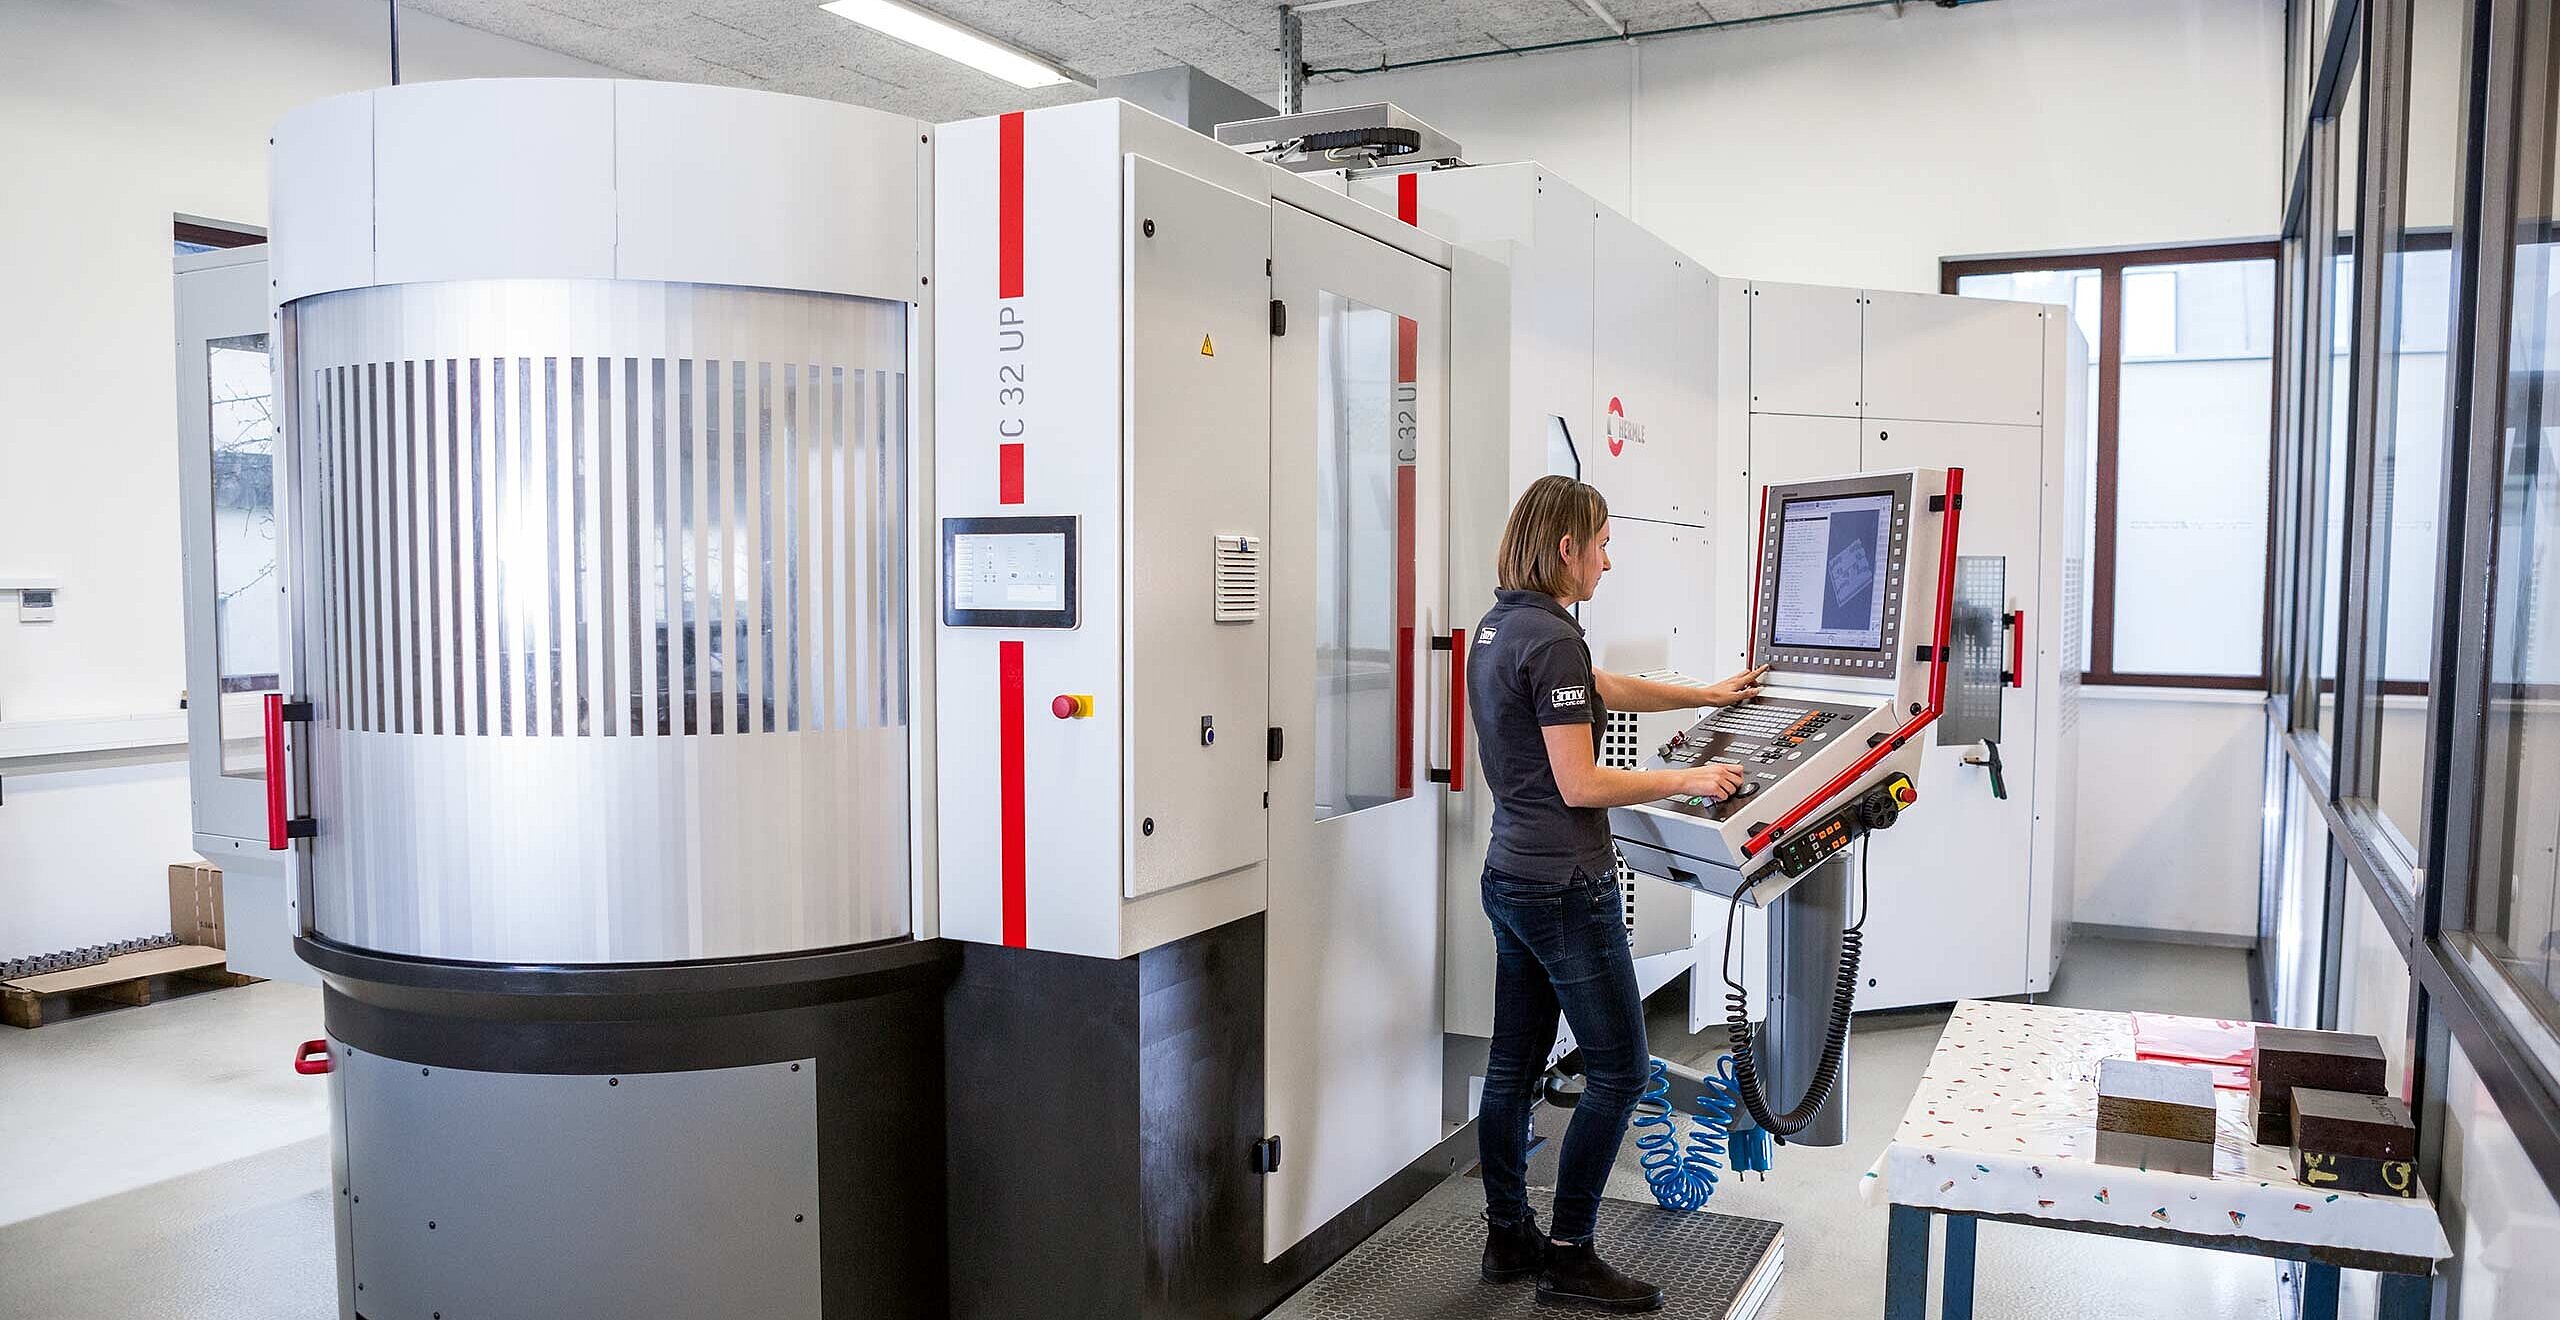 An overall view of the Hermle high-performance, 5-axis Hermle C 32 U CNC machining centre with a PW 250 pallet changer with storage; the PW 250 setup station is located at the front 